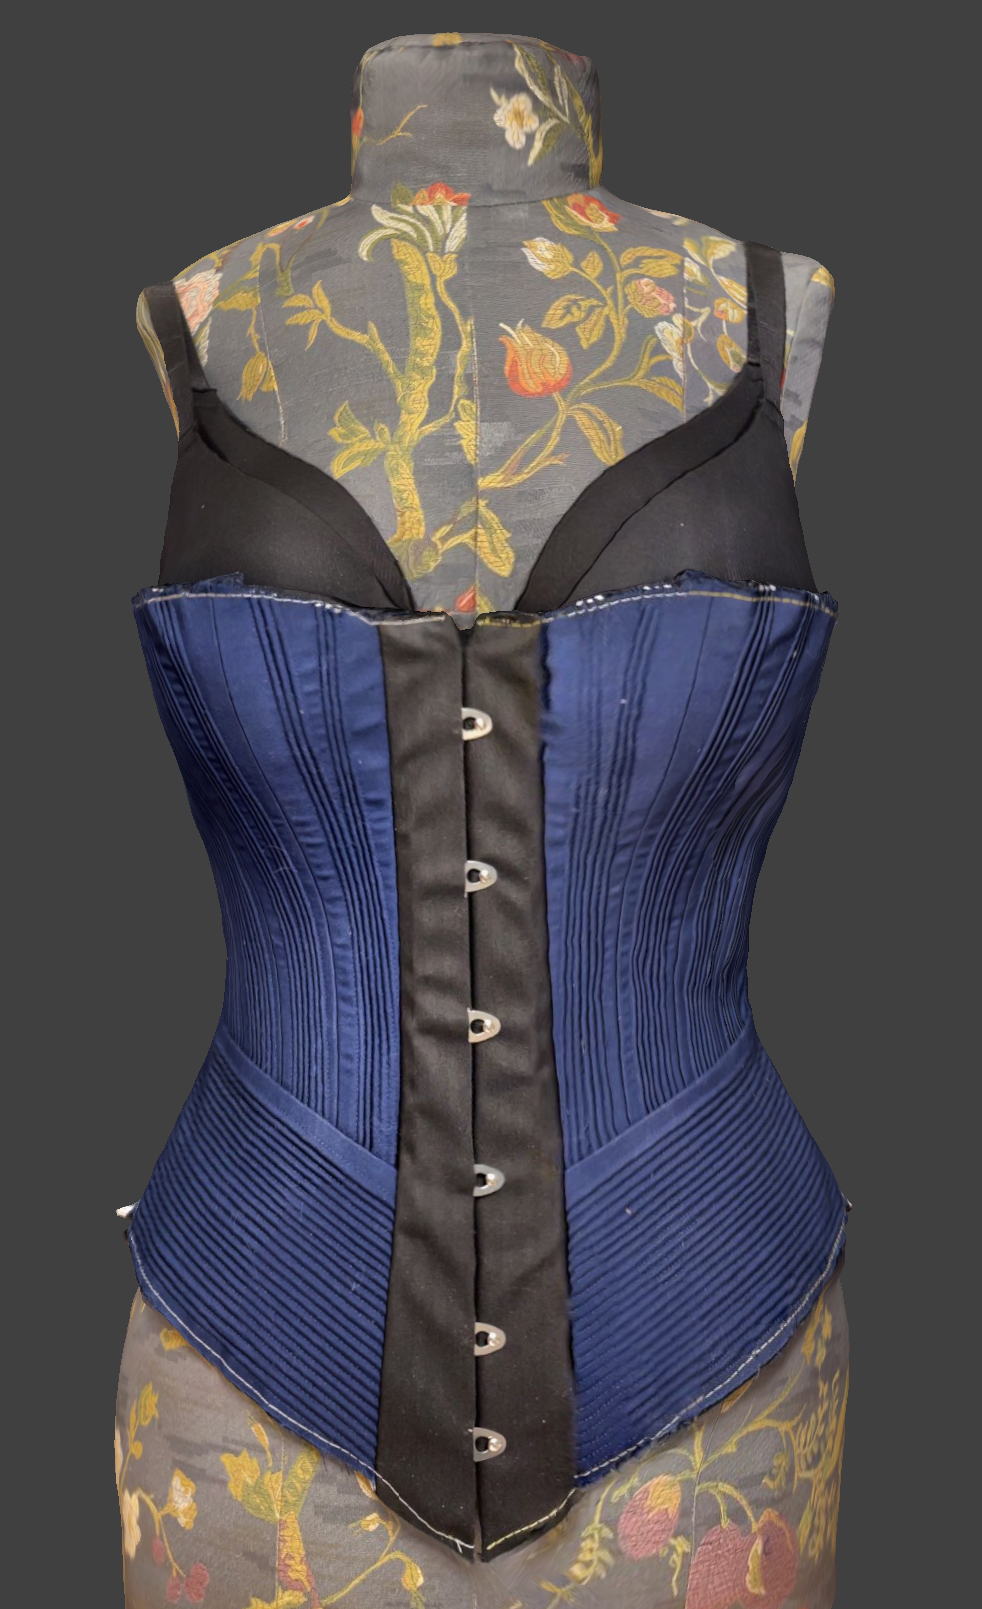 How to draft a corset pattern for a big bust, very modest corset